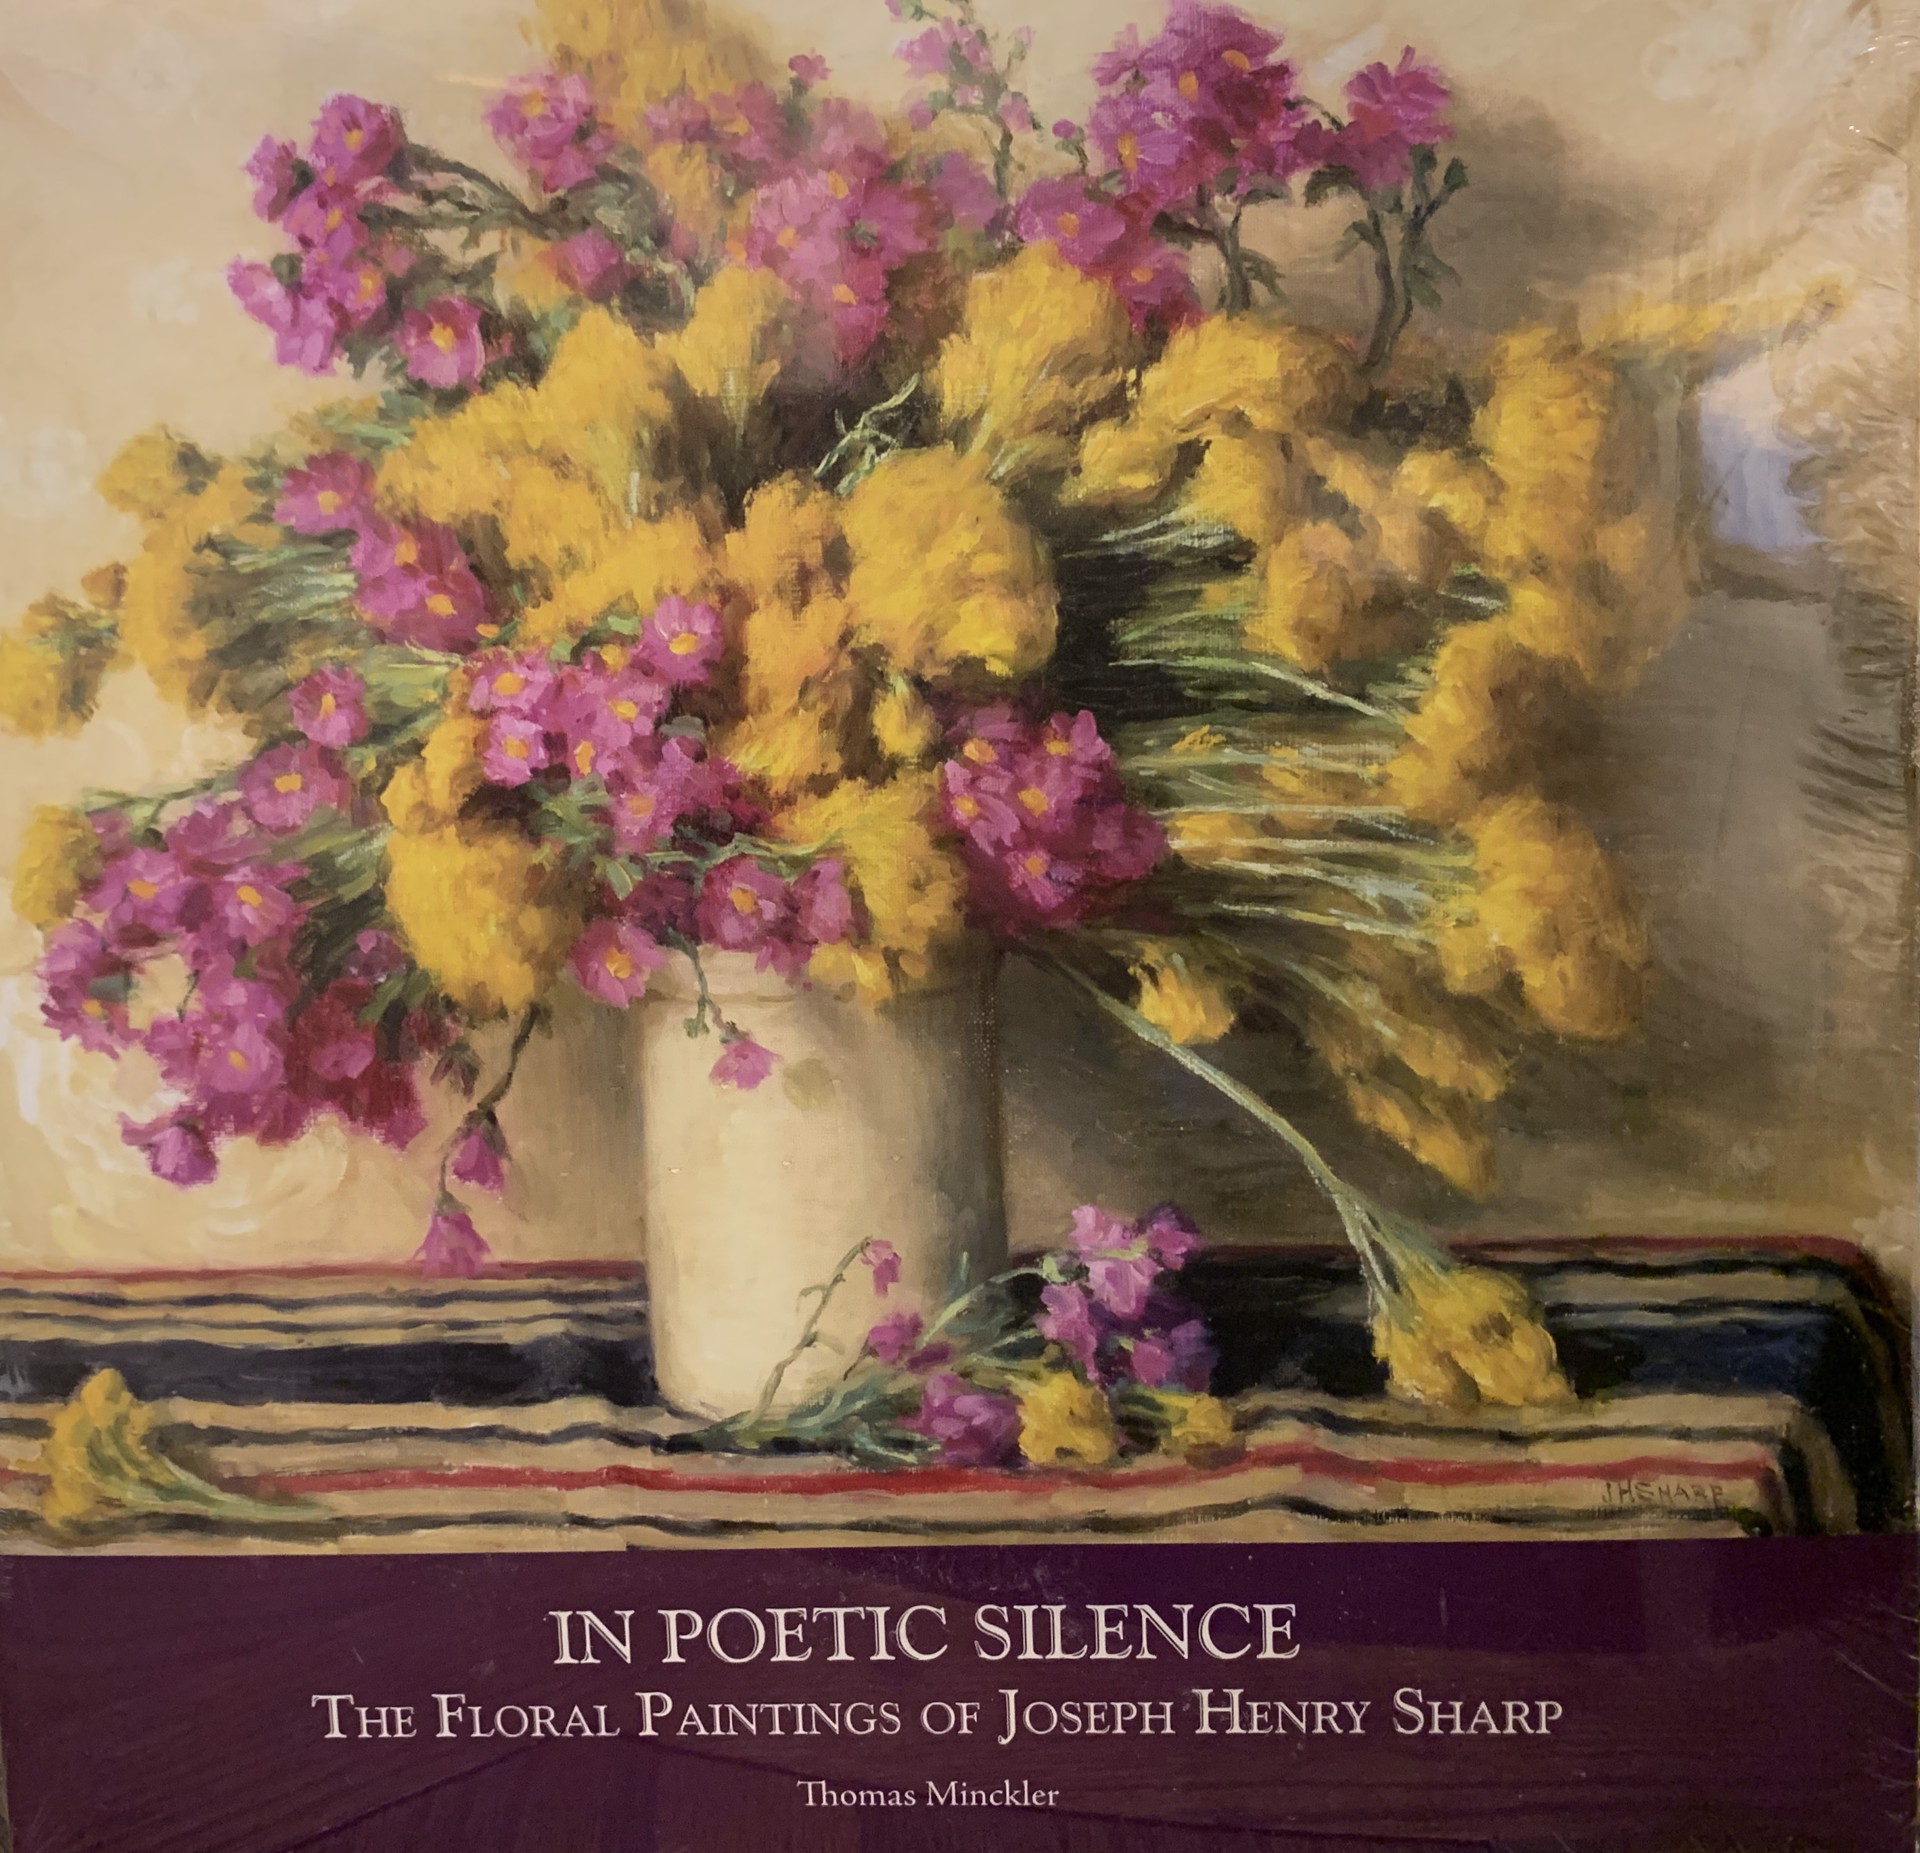 In Poetic Silence-The Floral Paintings of Joseph Henry Sharp